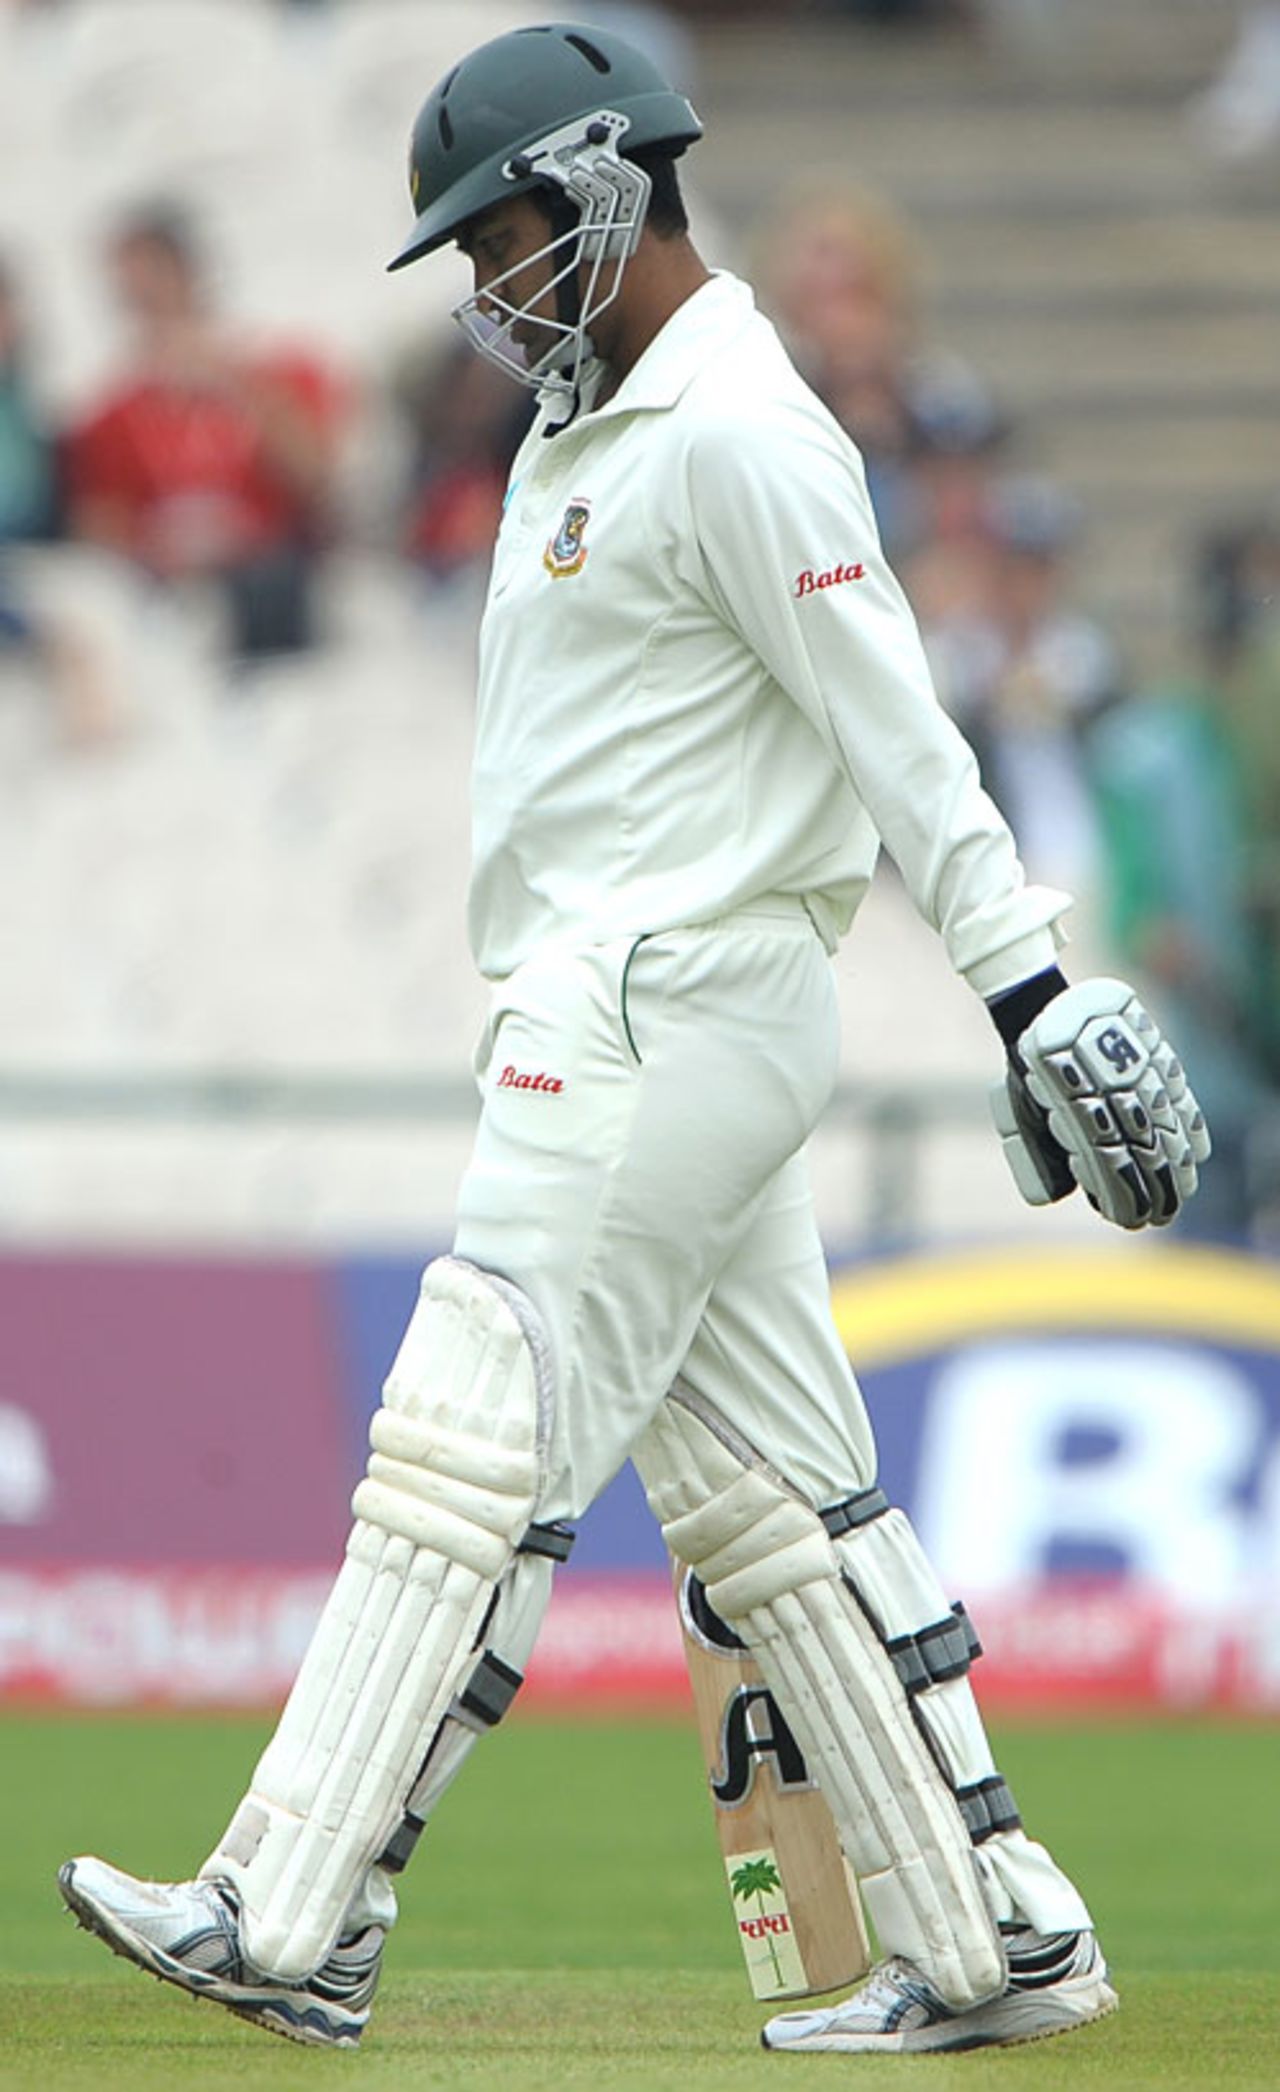 There were no heroics from Tamim Iqbal today as he departed second ball, England v Bangladesh, 2nd npower Test, Old Trafford, June 6, 2010